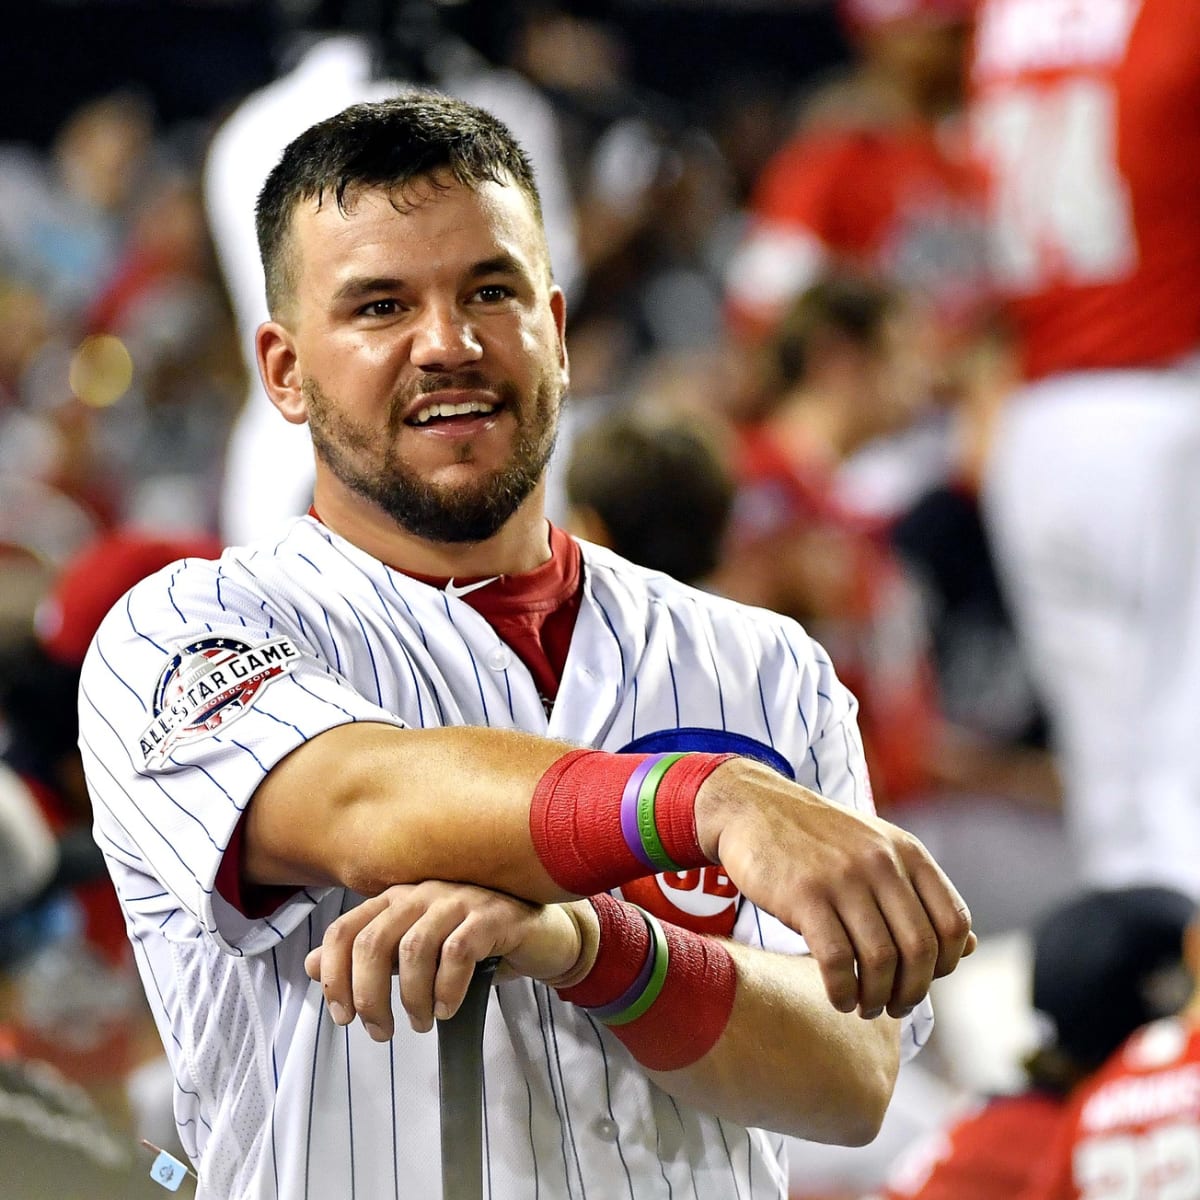 The heroic feats of Chicago Cubs star Kyle Schwarber